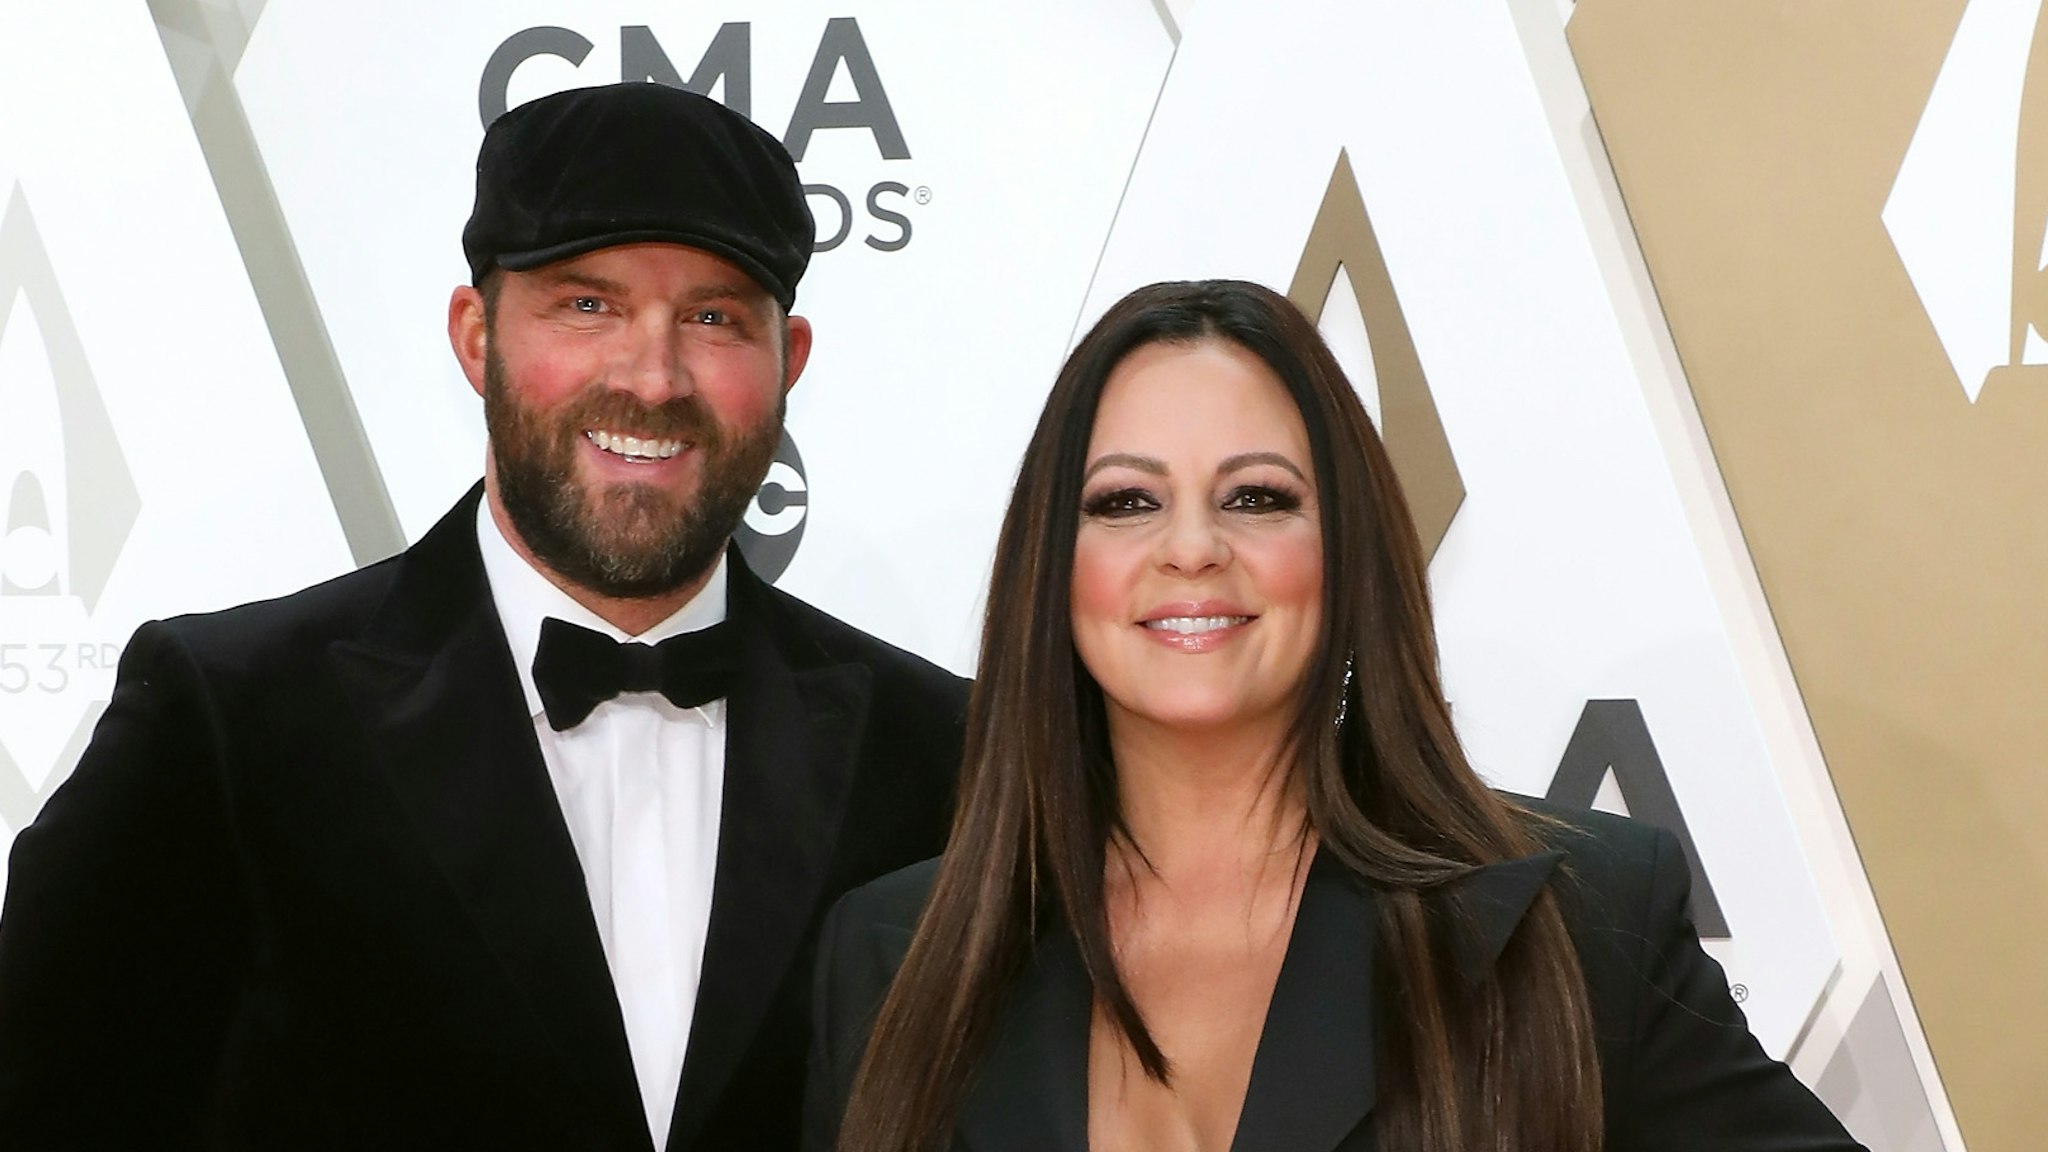 Jay Barker and Sara Evans attend the 53nd annual CMA Awards at Bridgestone Arena on November 13, 2019 in Nashville, Tennessee.